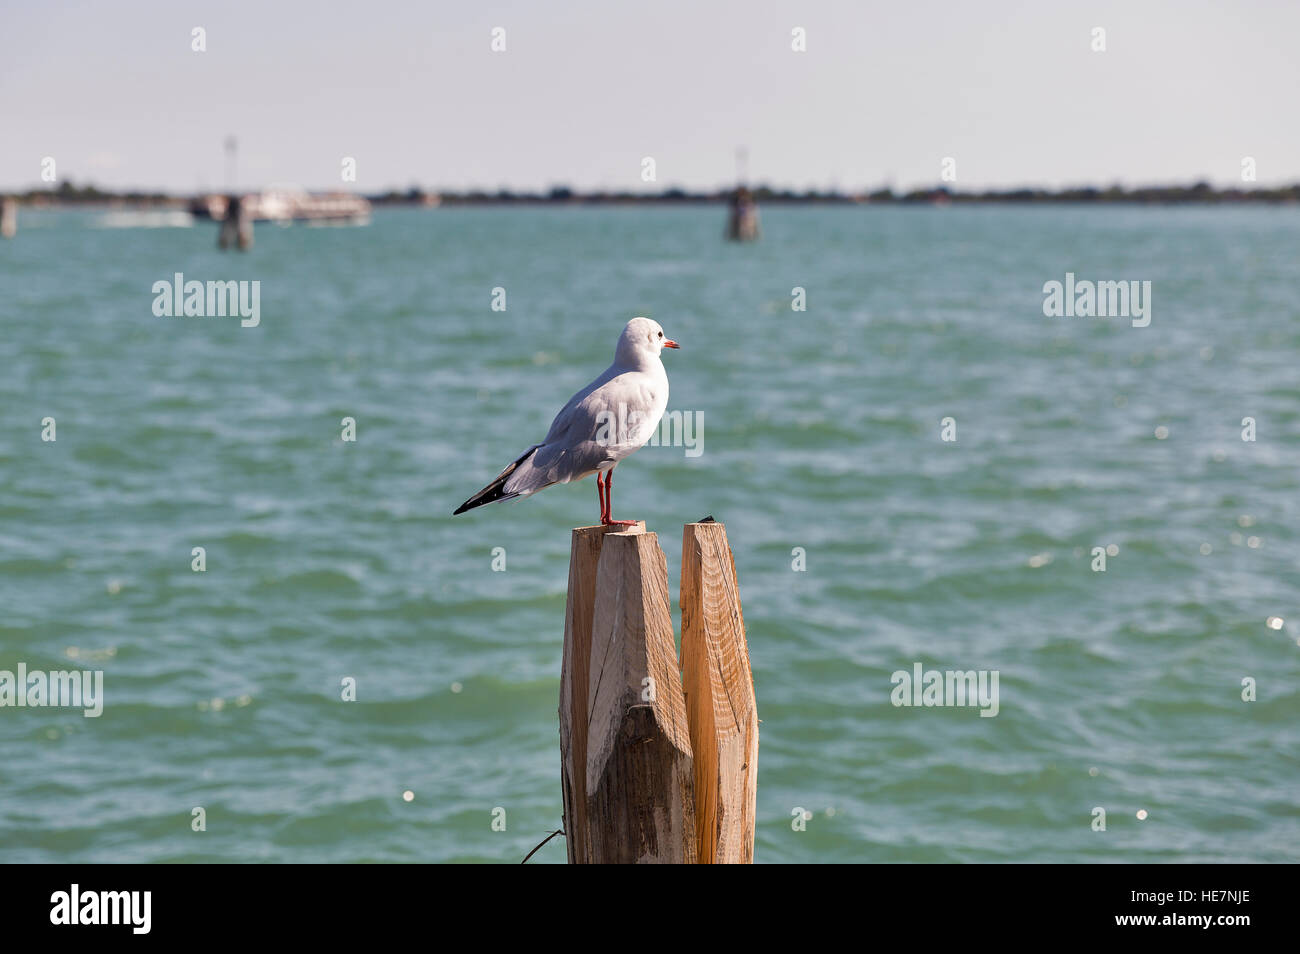 Seagull standing atop on wooden pile for navigation in Venice canal, Veneto, Italy. Stock Photo